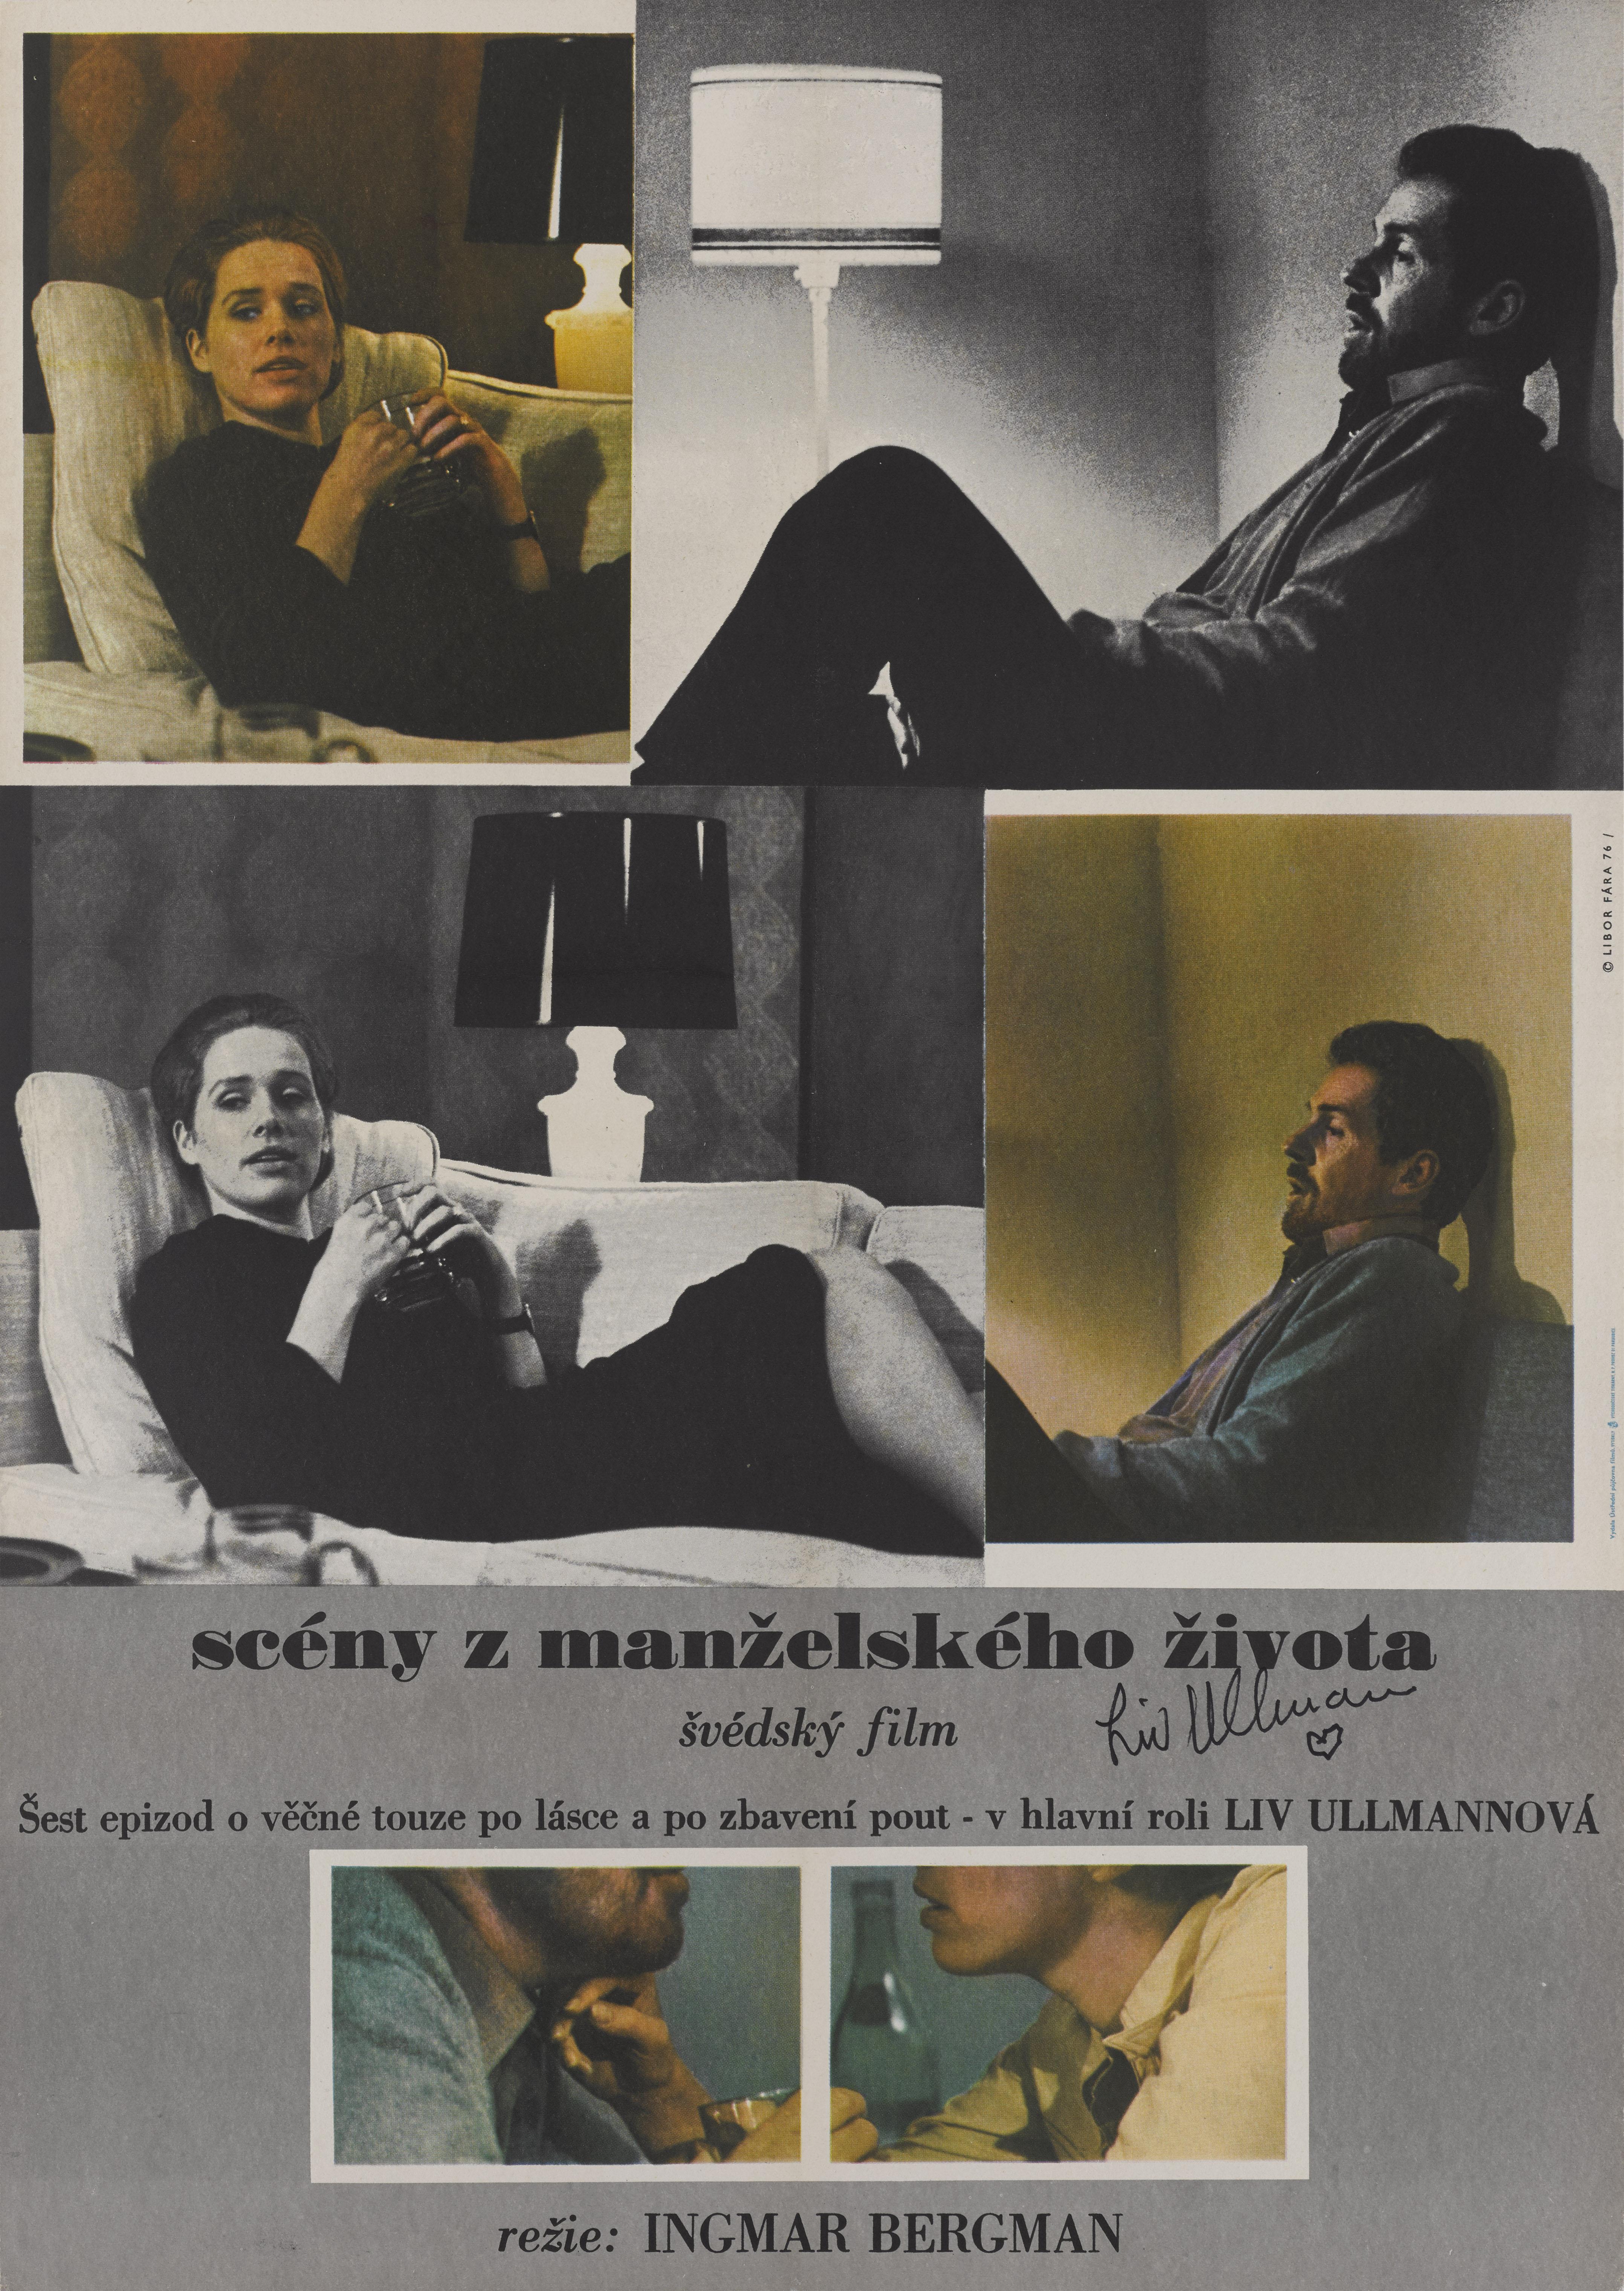 Original Czechoslovakian film poster for 1974 Swedish film written and directed by Ingmar Bergman, and stars Liv Ullmann, Erland Josephson, and Bibi Andersson. The film shows the relationship and life experiences that hold together the marriage of